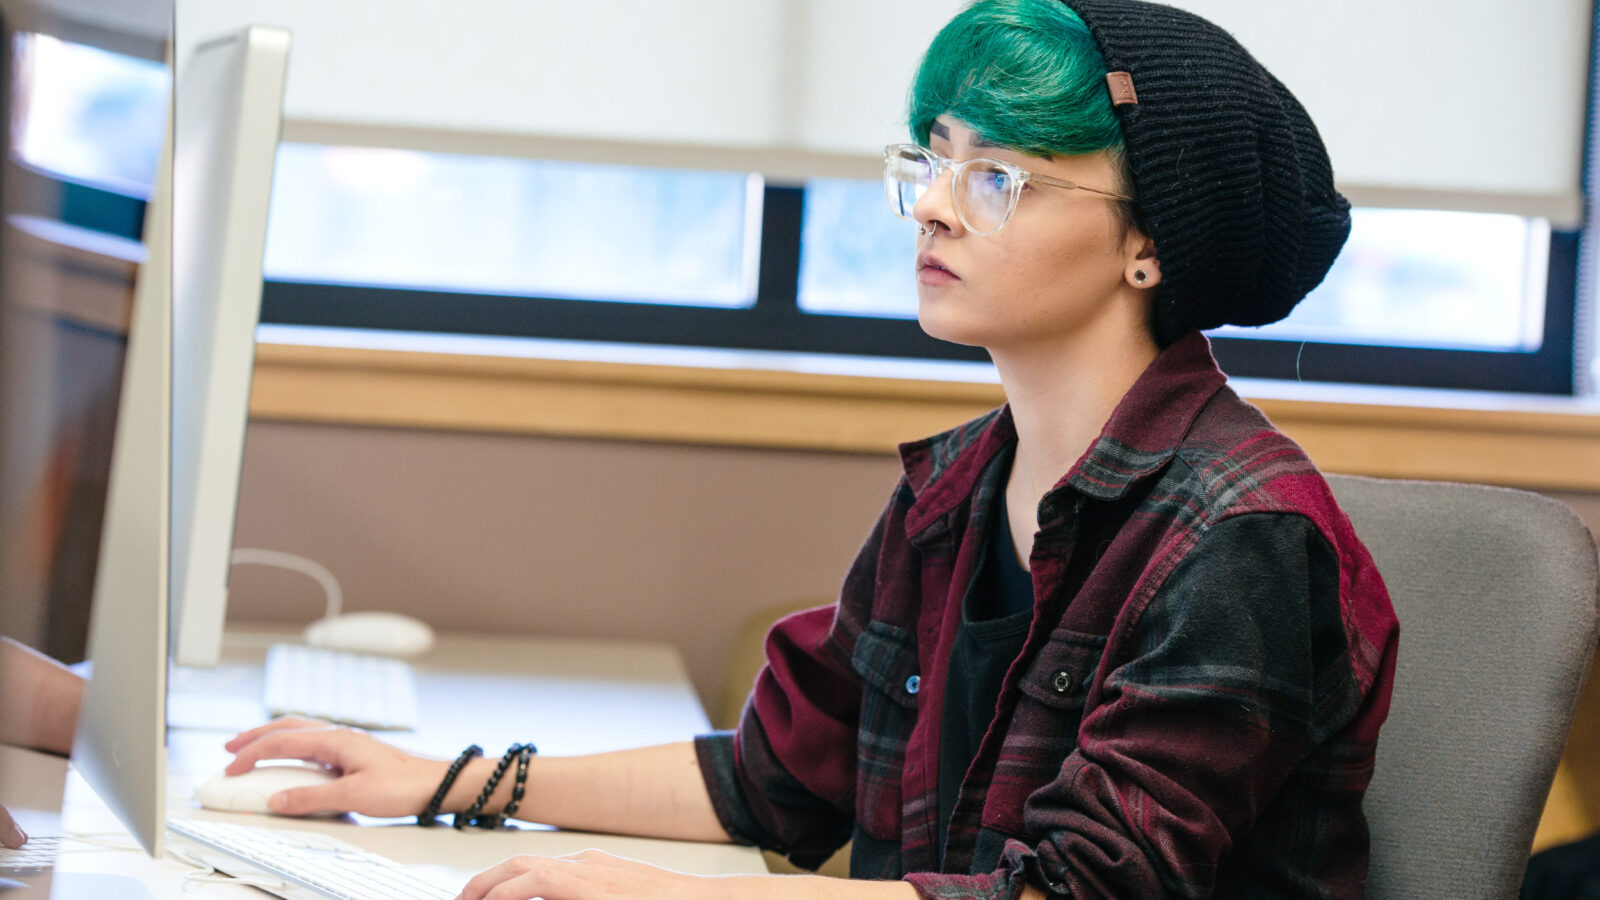 a student with colorful hair works intently at a computer